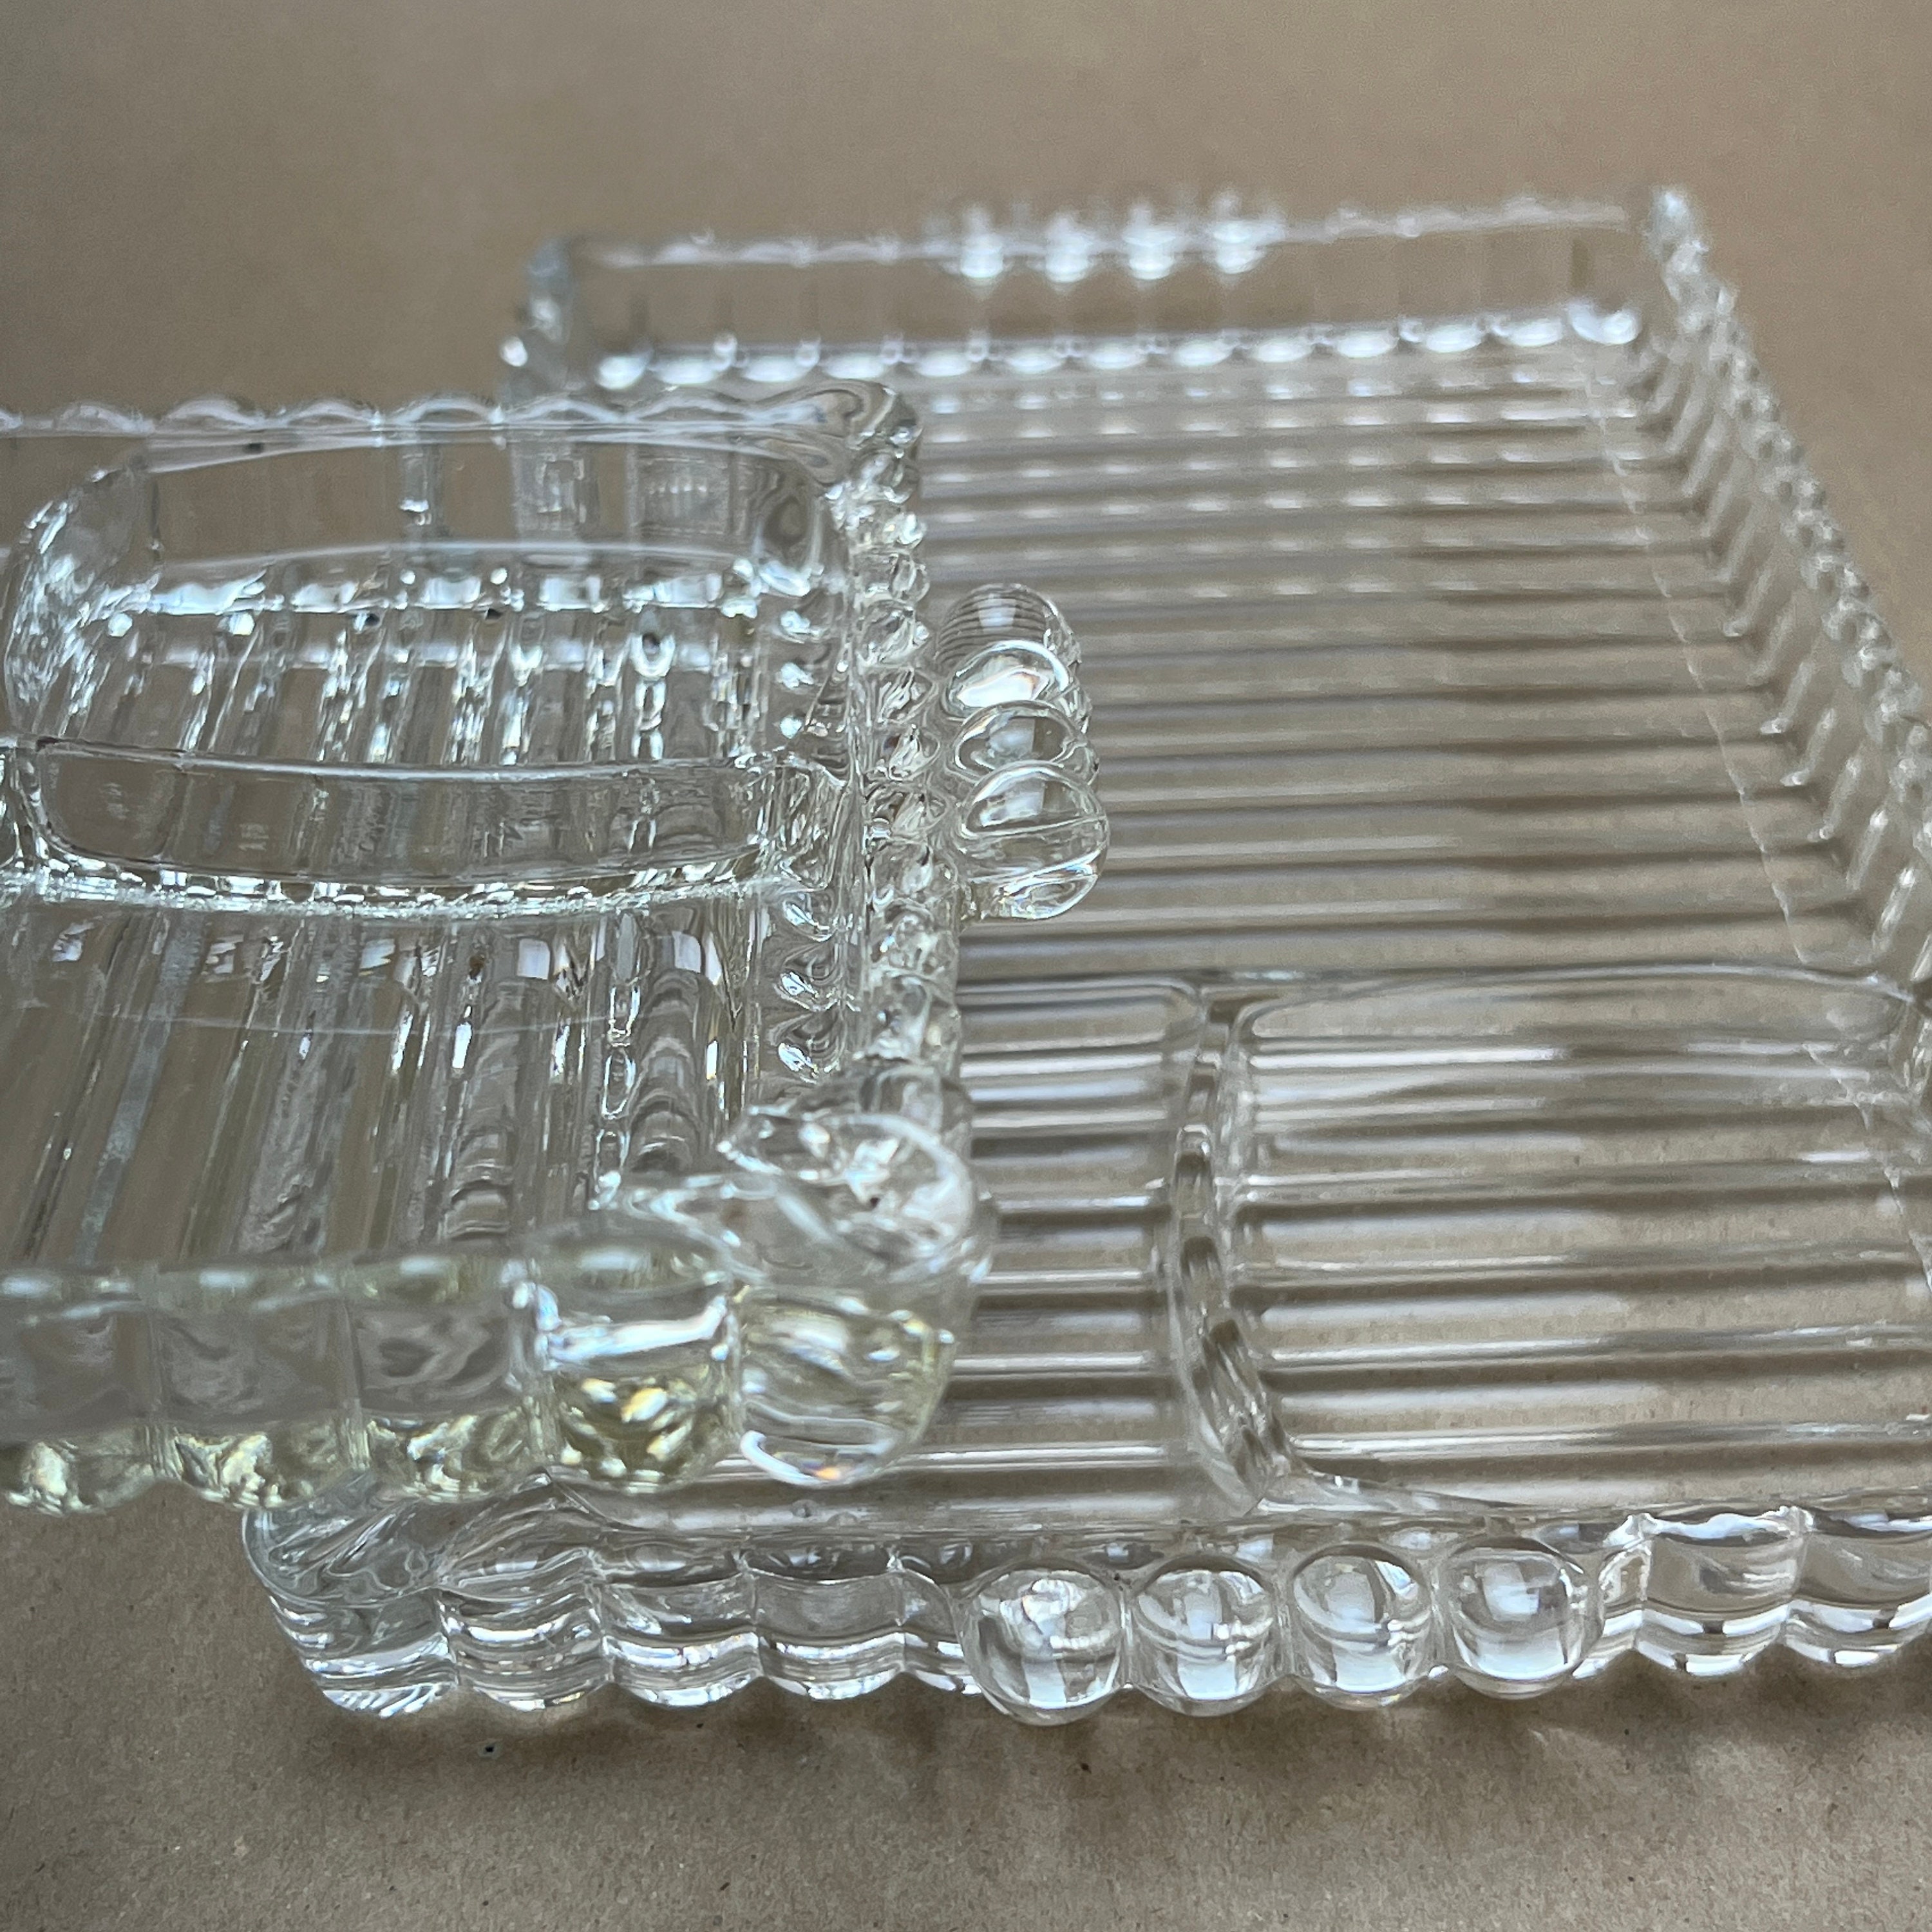 Swanky Ornate Glass Rolling Tray With Built in Ash Tray, Smoking Tobacco  Accessory, Snack Smoking Glass Tray, Tobacco Rolling Tray 